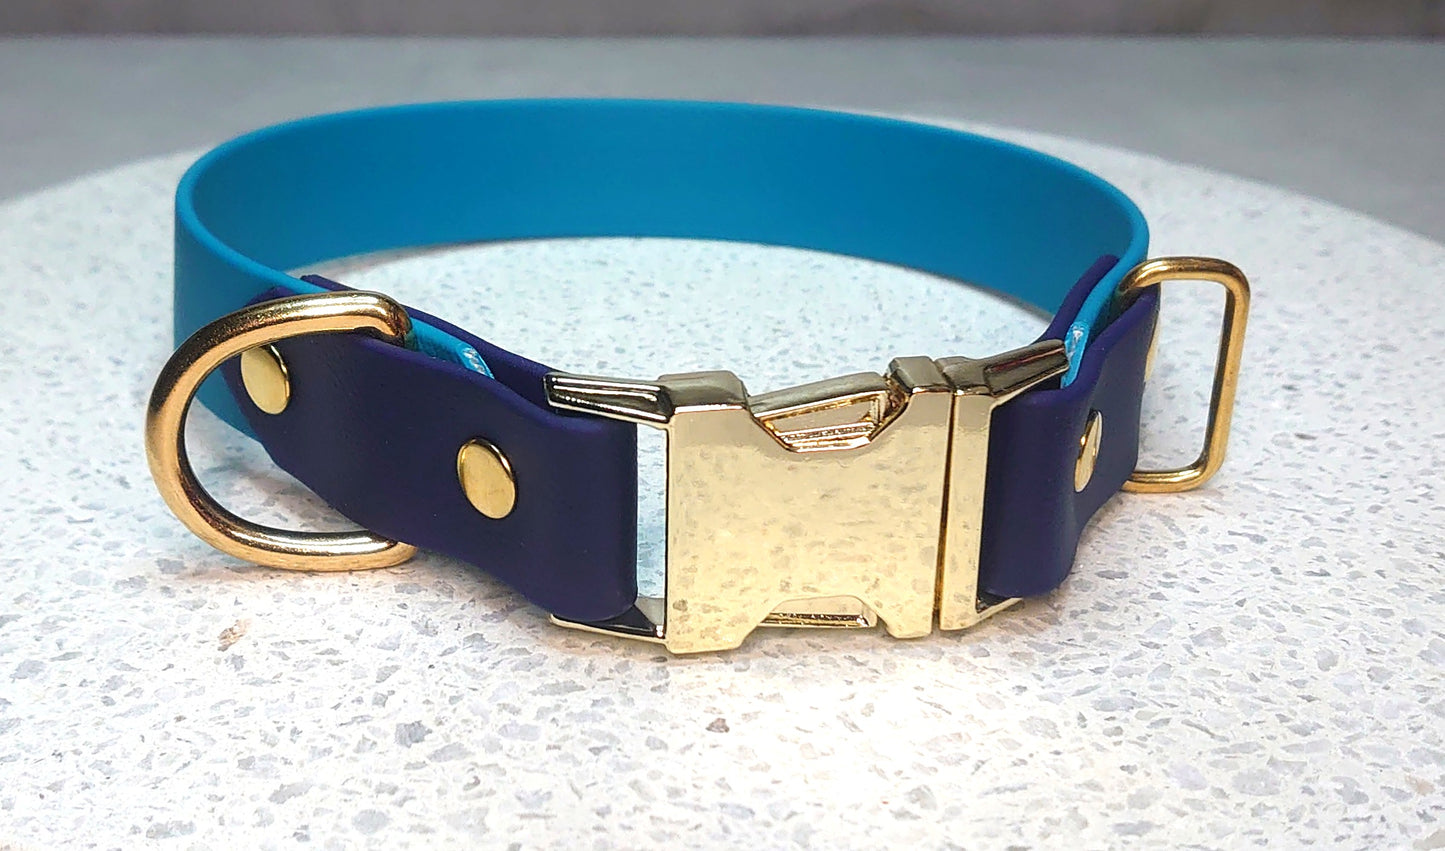 Biothane two tone collar with quick release buckle